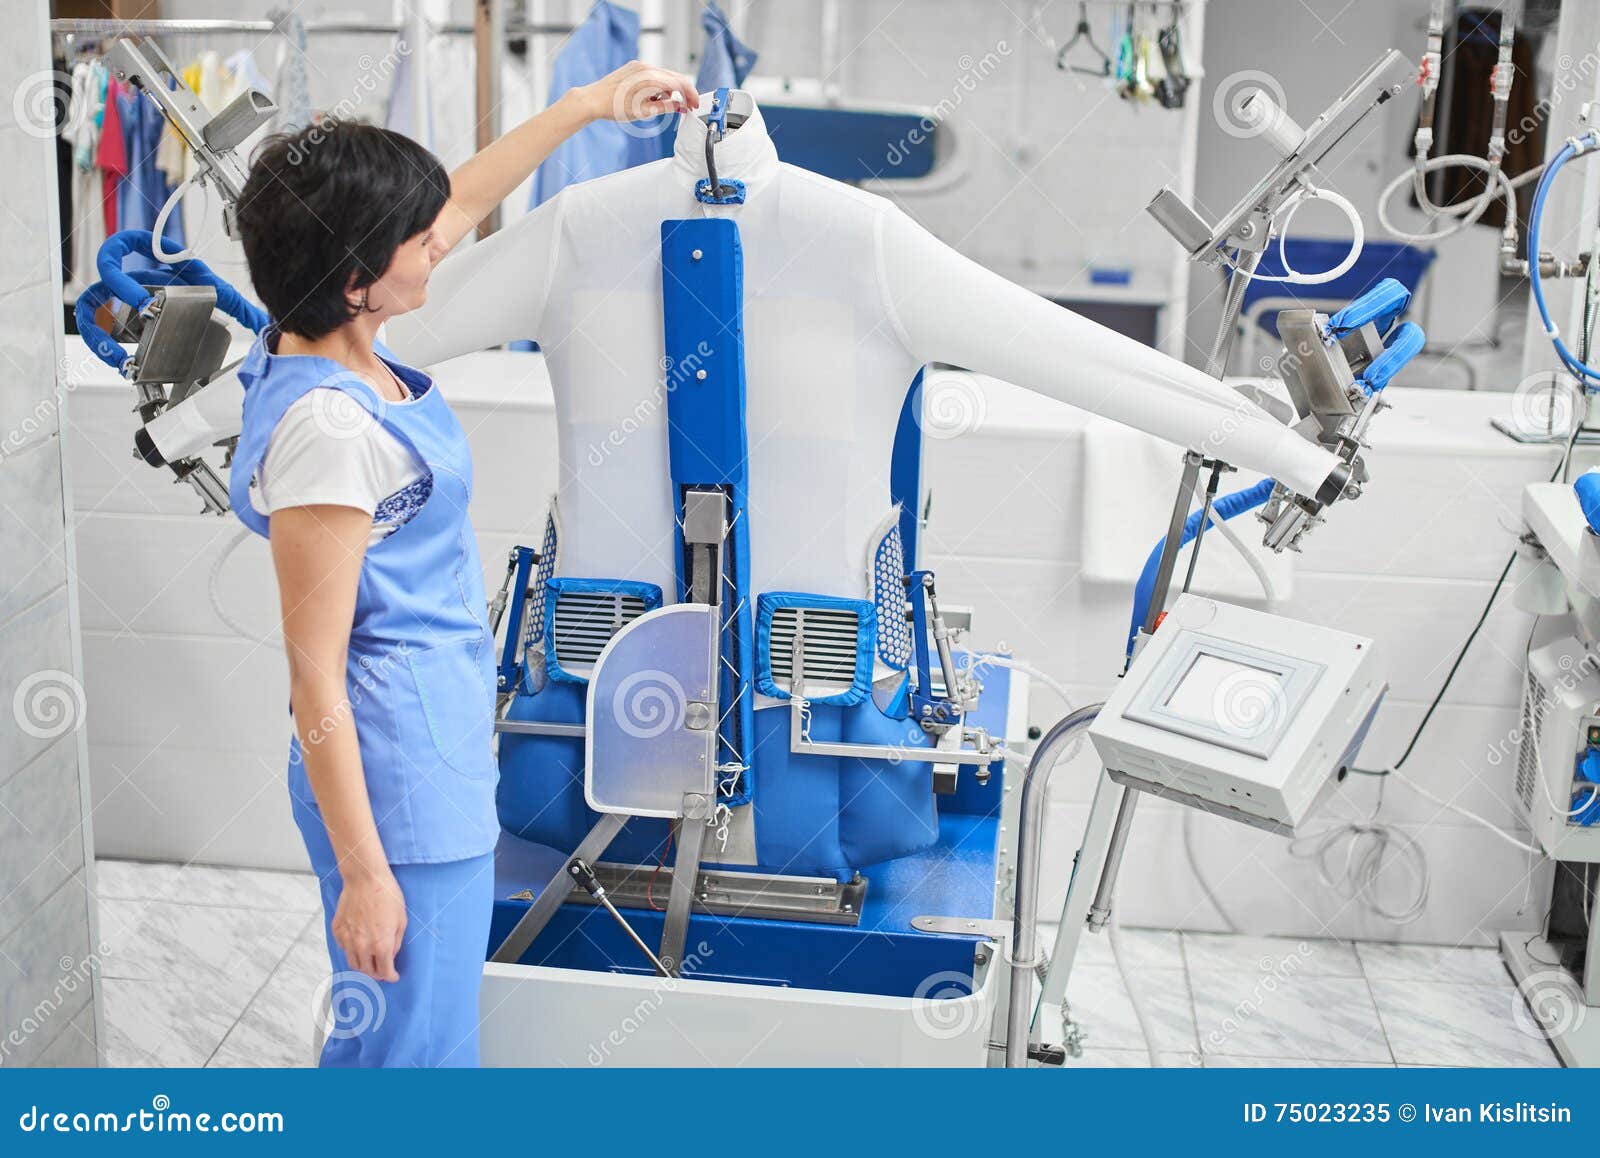 Woman Worker Laundry Ironed Clothes On The Automatic Steam ...